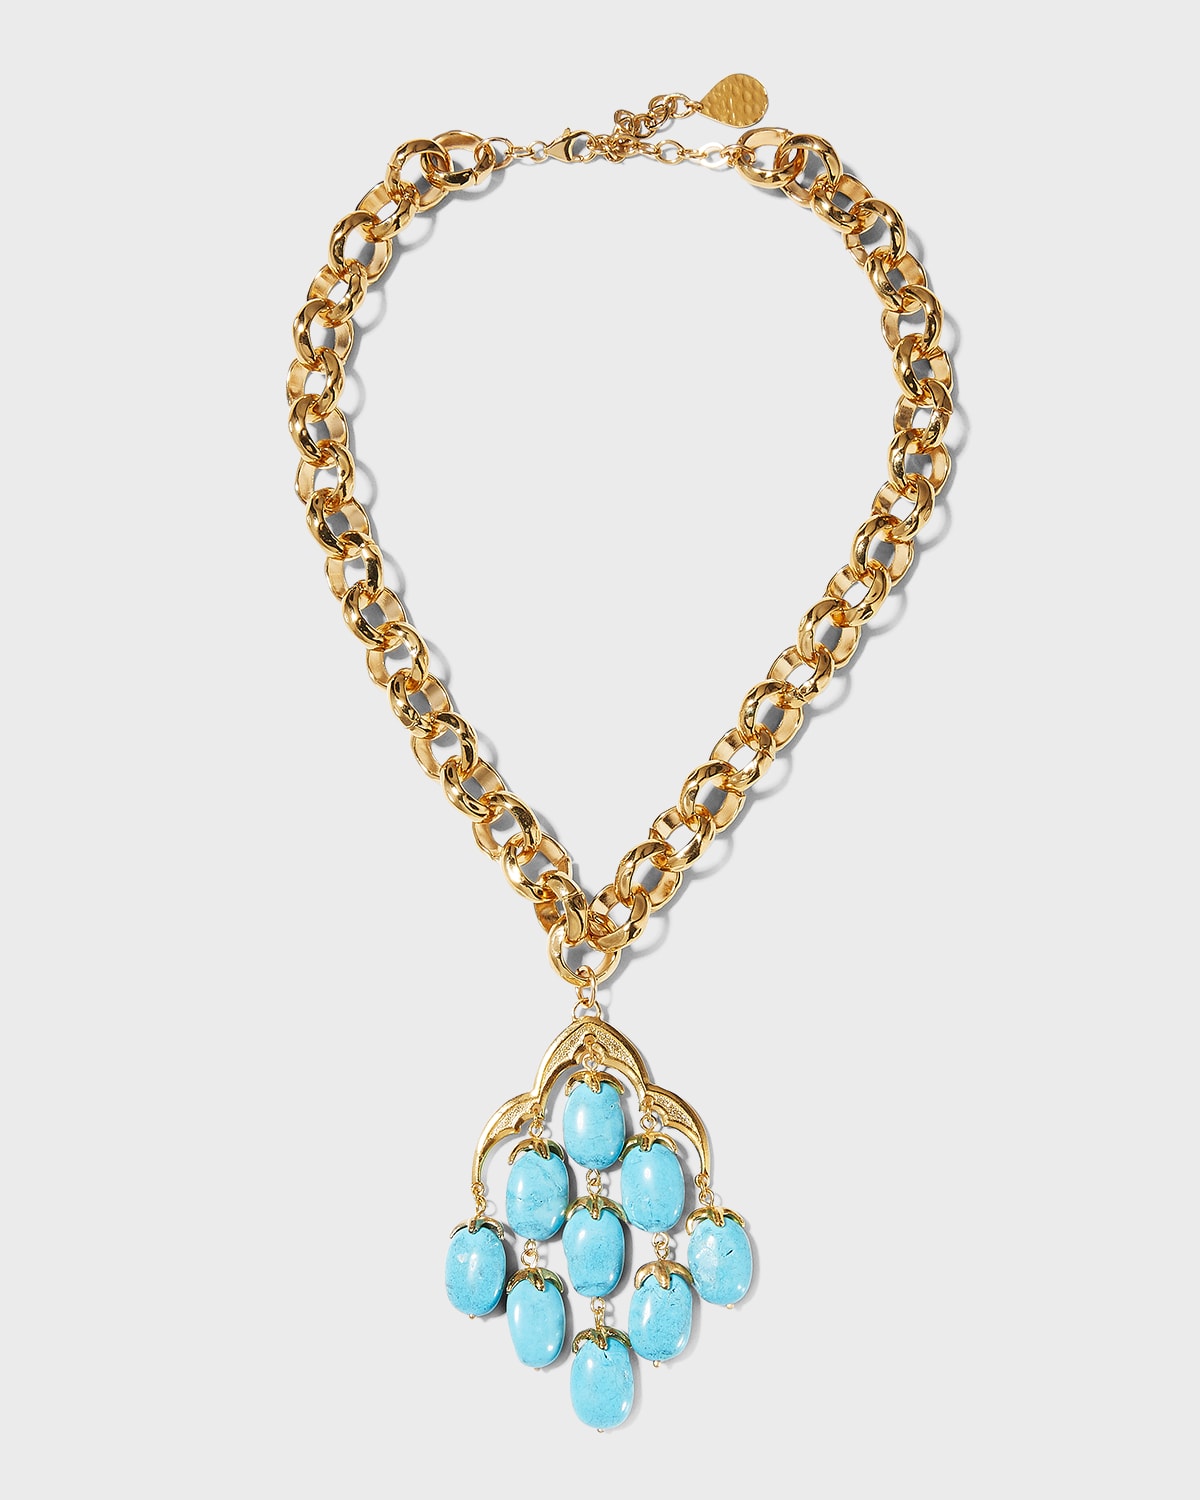 Devon Leigh Turquoise Gold-Plate Pendant Chain Necklace